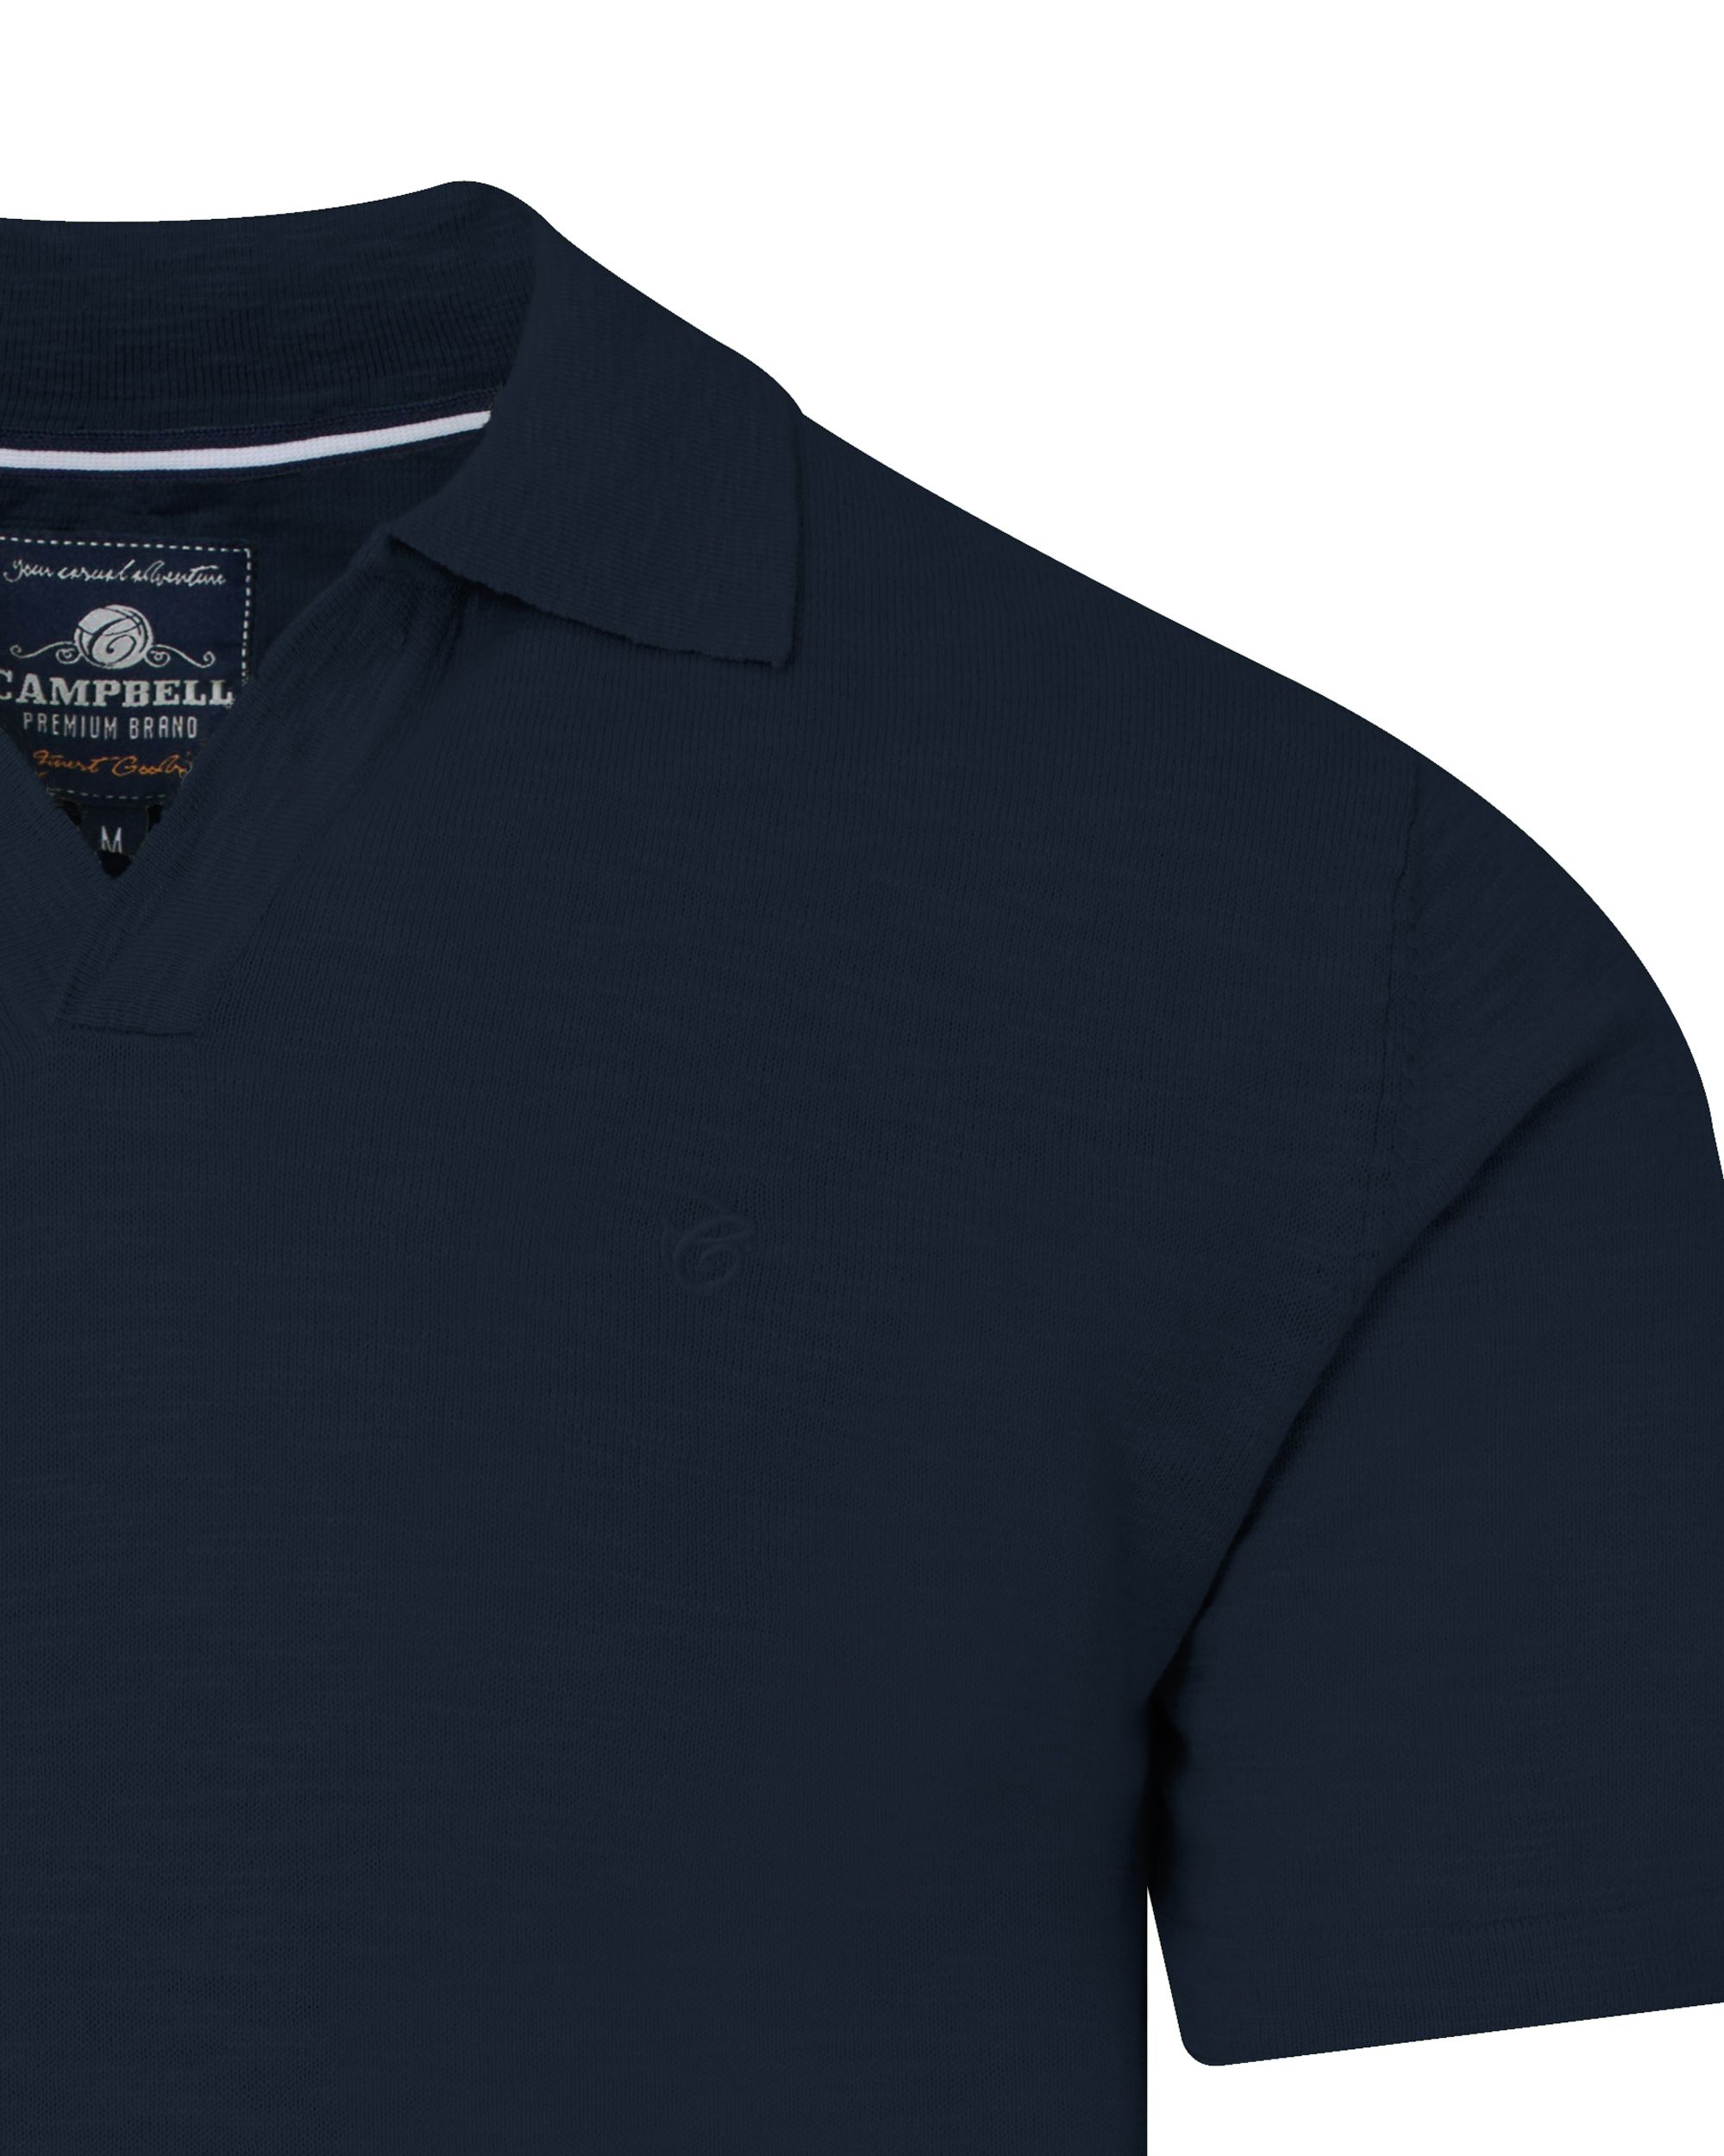 Campbell Classic Nelson Polo KM Night Sky 089149-002-L